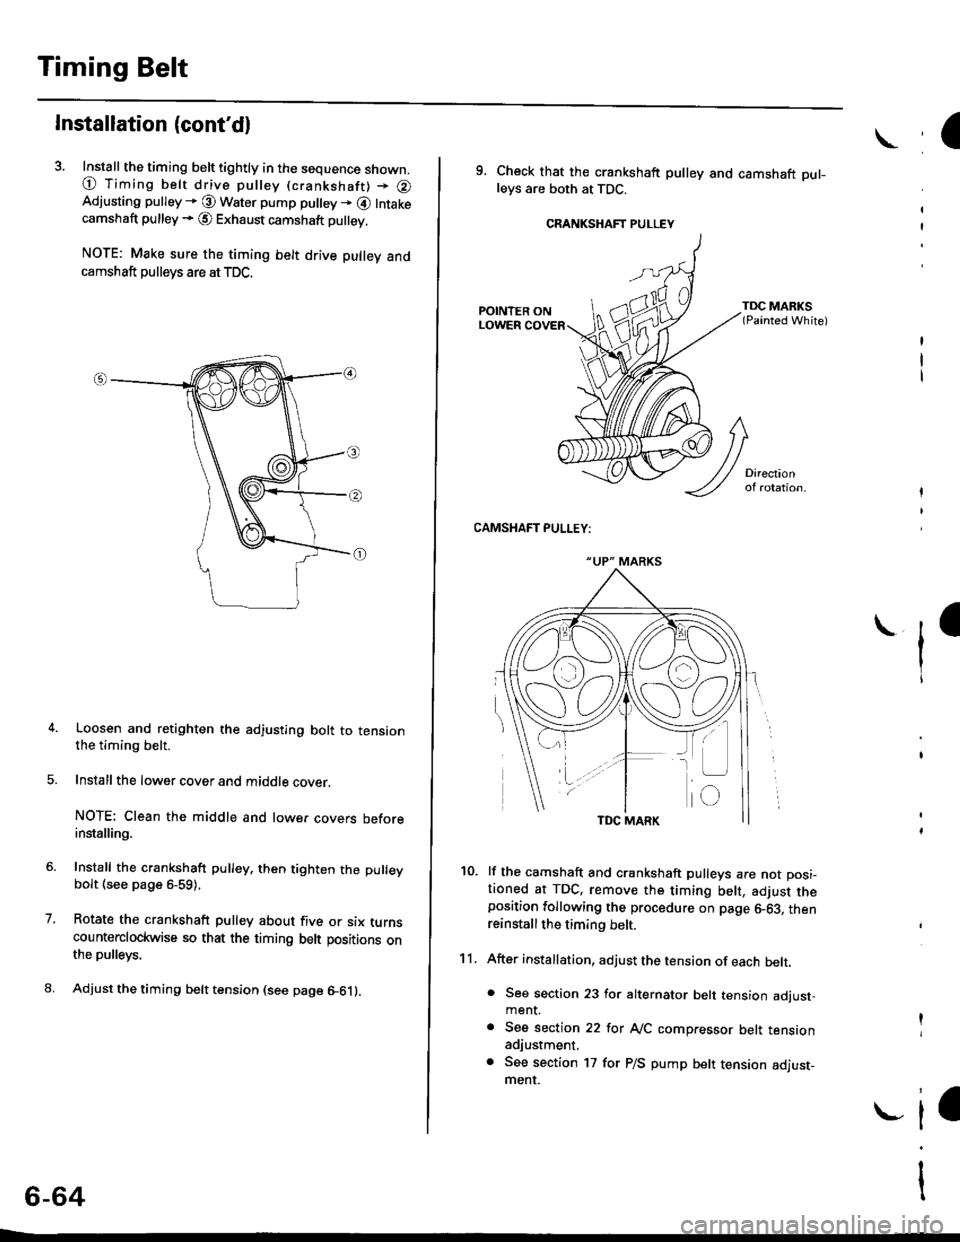 HONDA CIVIC 1997 6.G Workshop Manual Timing Belt
lnstallation (contdl
3. Install the timing belt tightly in the sequence shown.
@ Timing belt drive pulley (crankshaft) + @Adjusting pulley * @ Water pump pu ey + @ Intakecamshaft pulley +